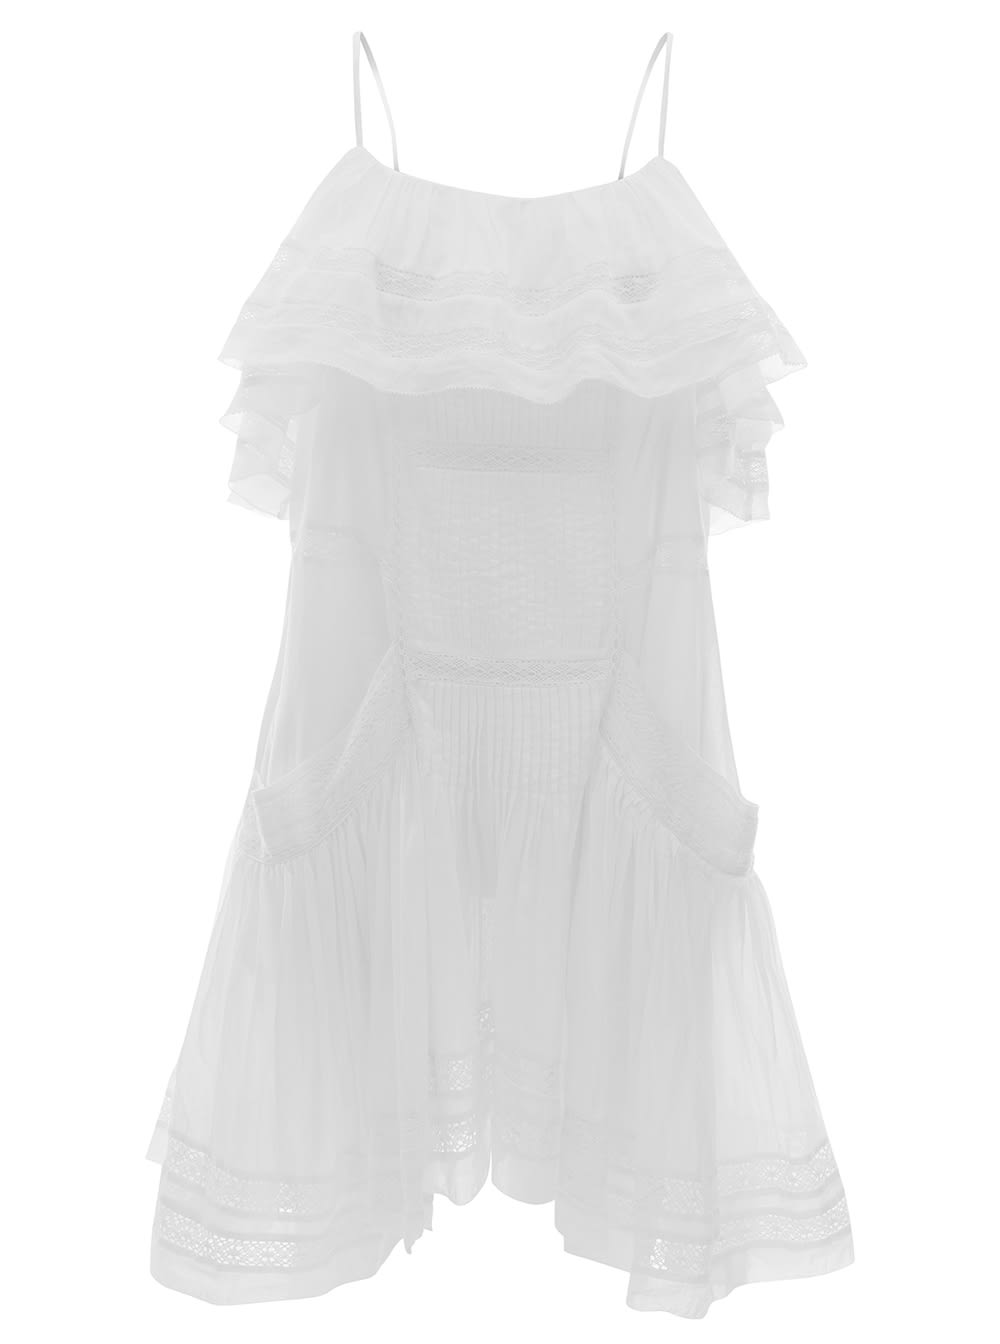 ISABEL MARANT ÉTOILE WHITE MINI DRESS WITH BRODERIE ANGLAISE IN COTTON WOMAN